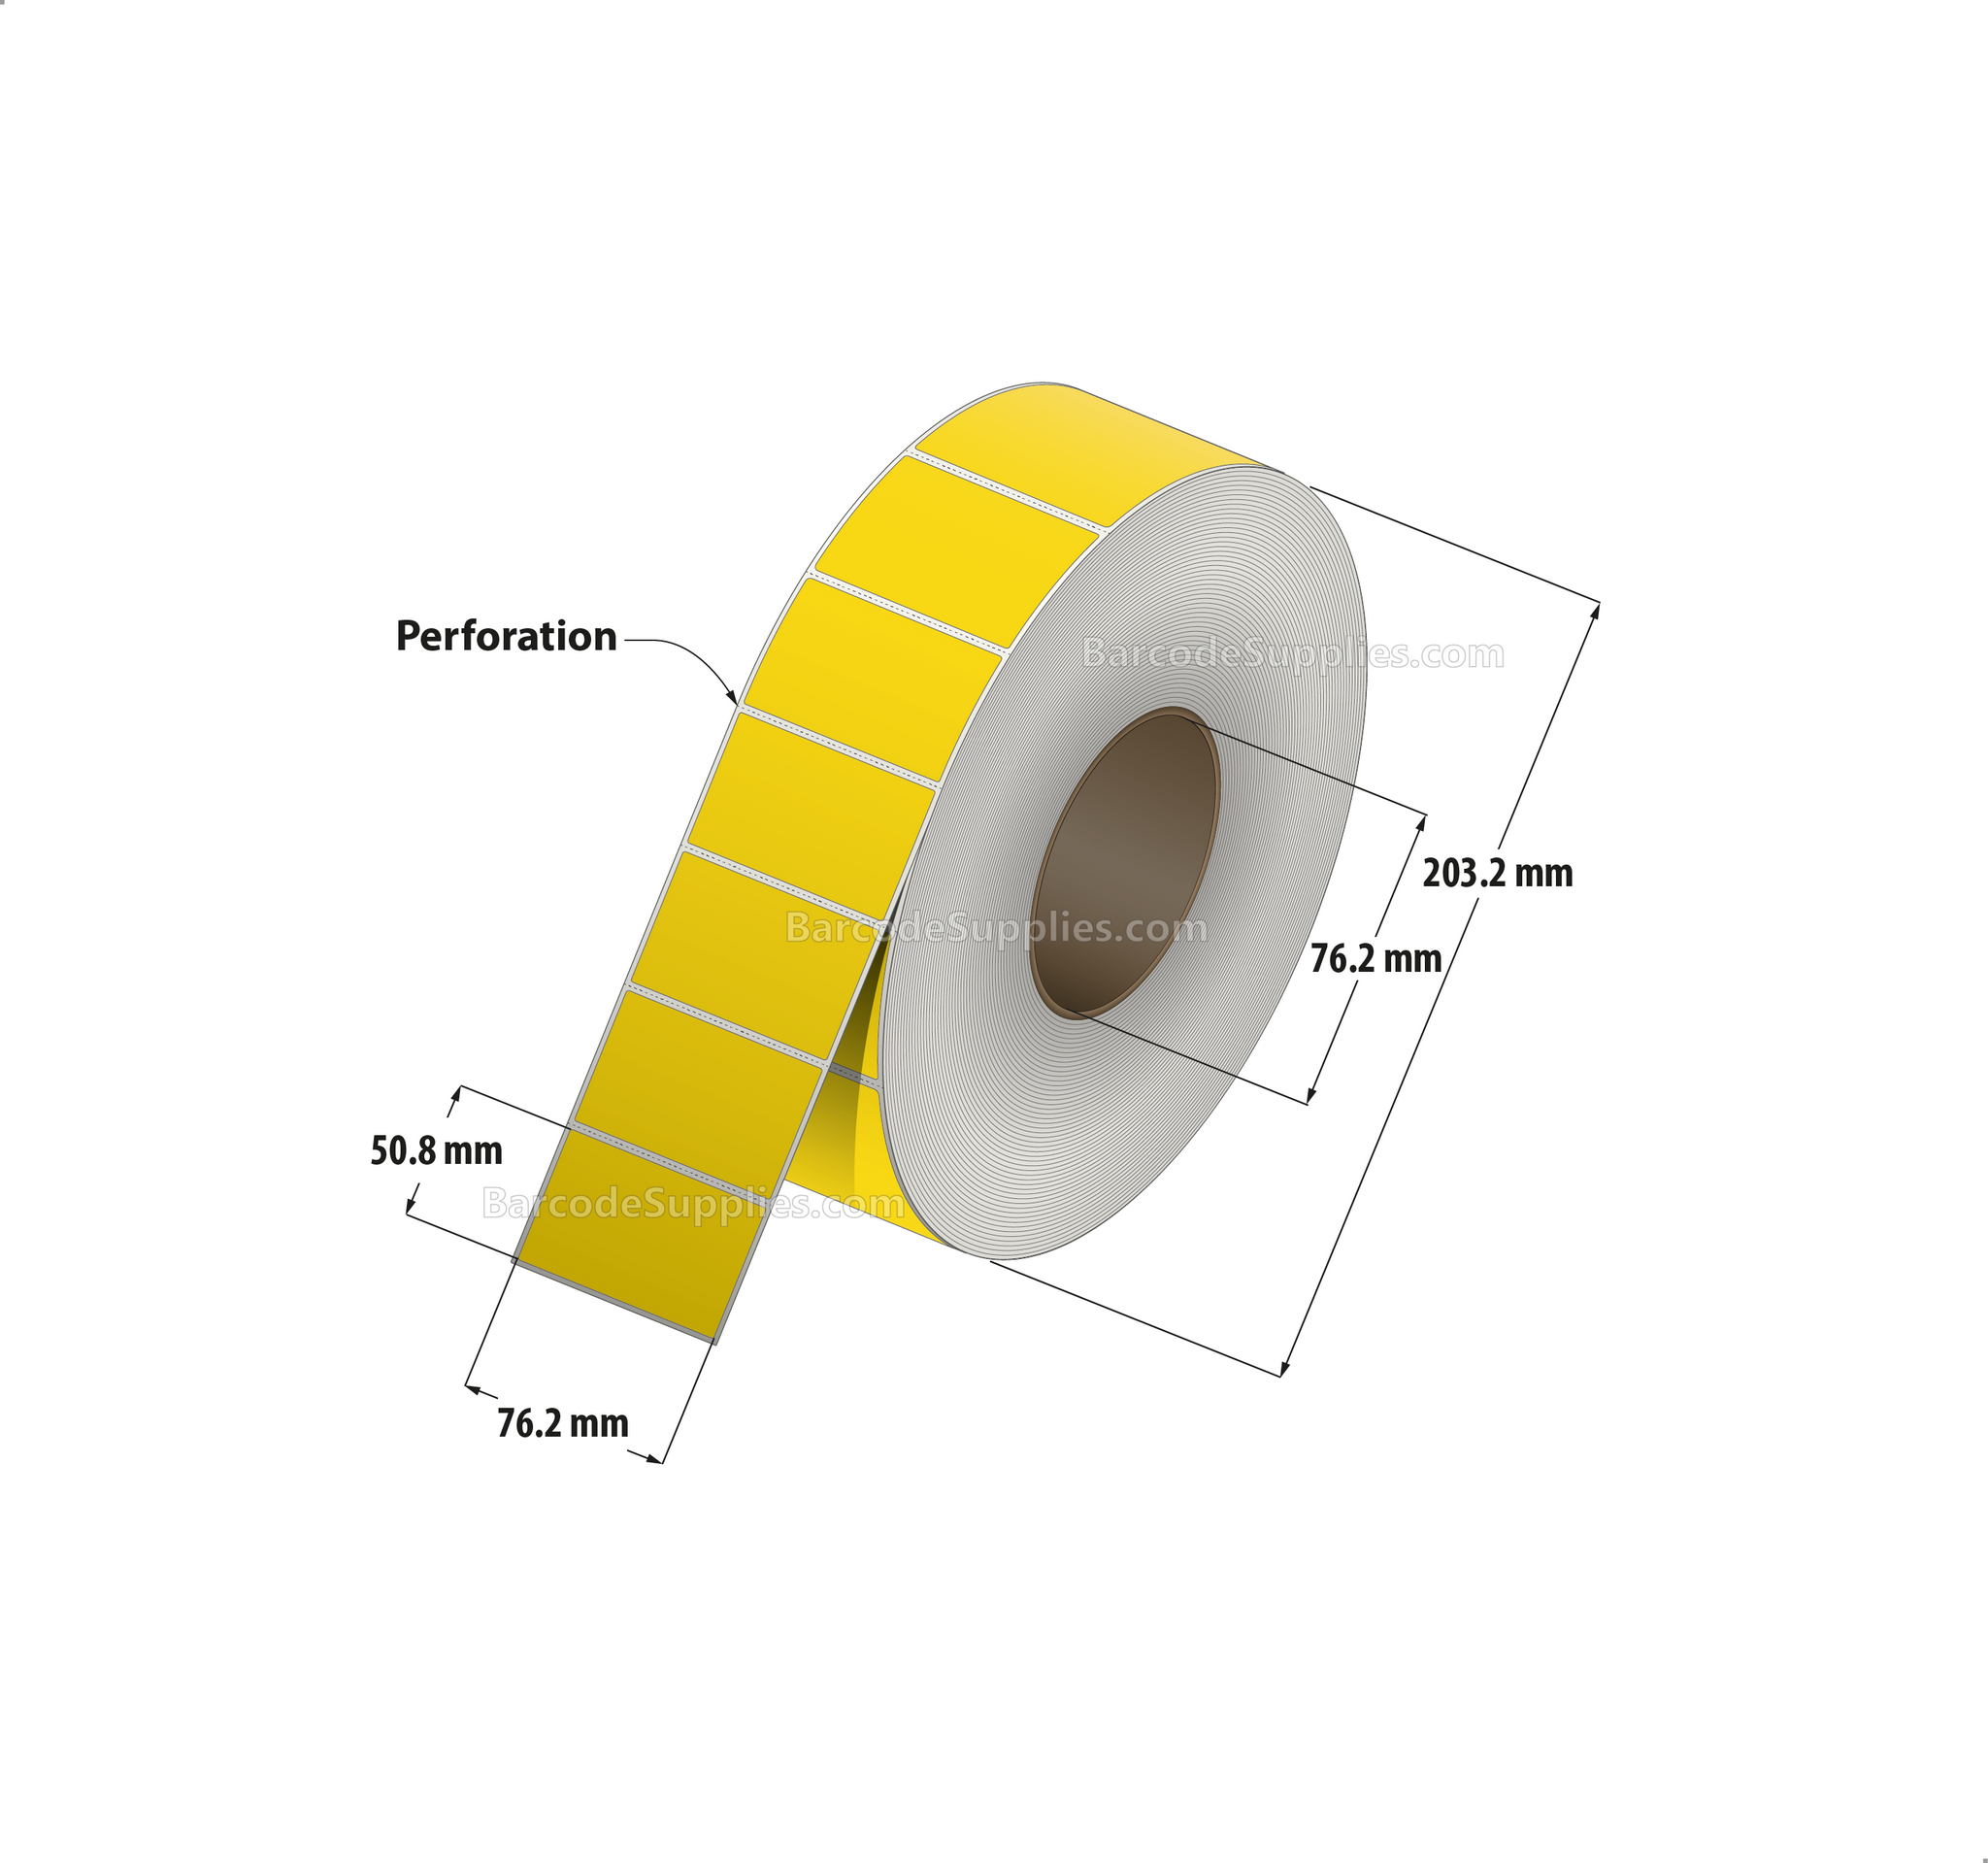 3 x 2 Thermal Transfer Pantone Yellow Labels With Permanent Adhesive - Perforated - 2900 Labels Per Roll - Carton Of 8 Rolls - 23200 Labels Total - MPN: RFC-3-2-2900-YL